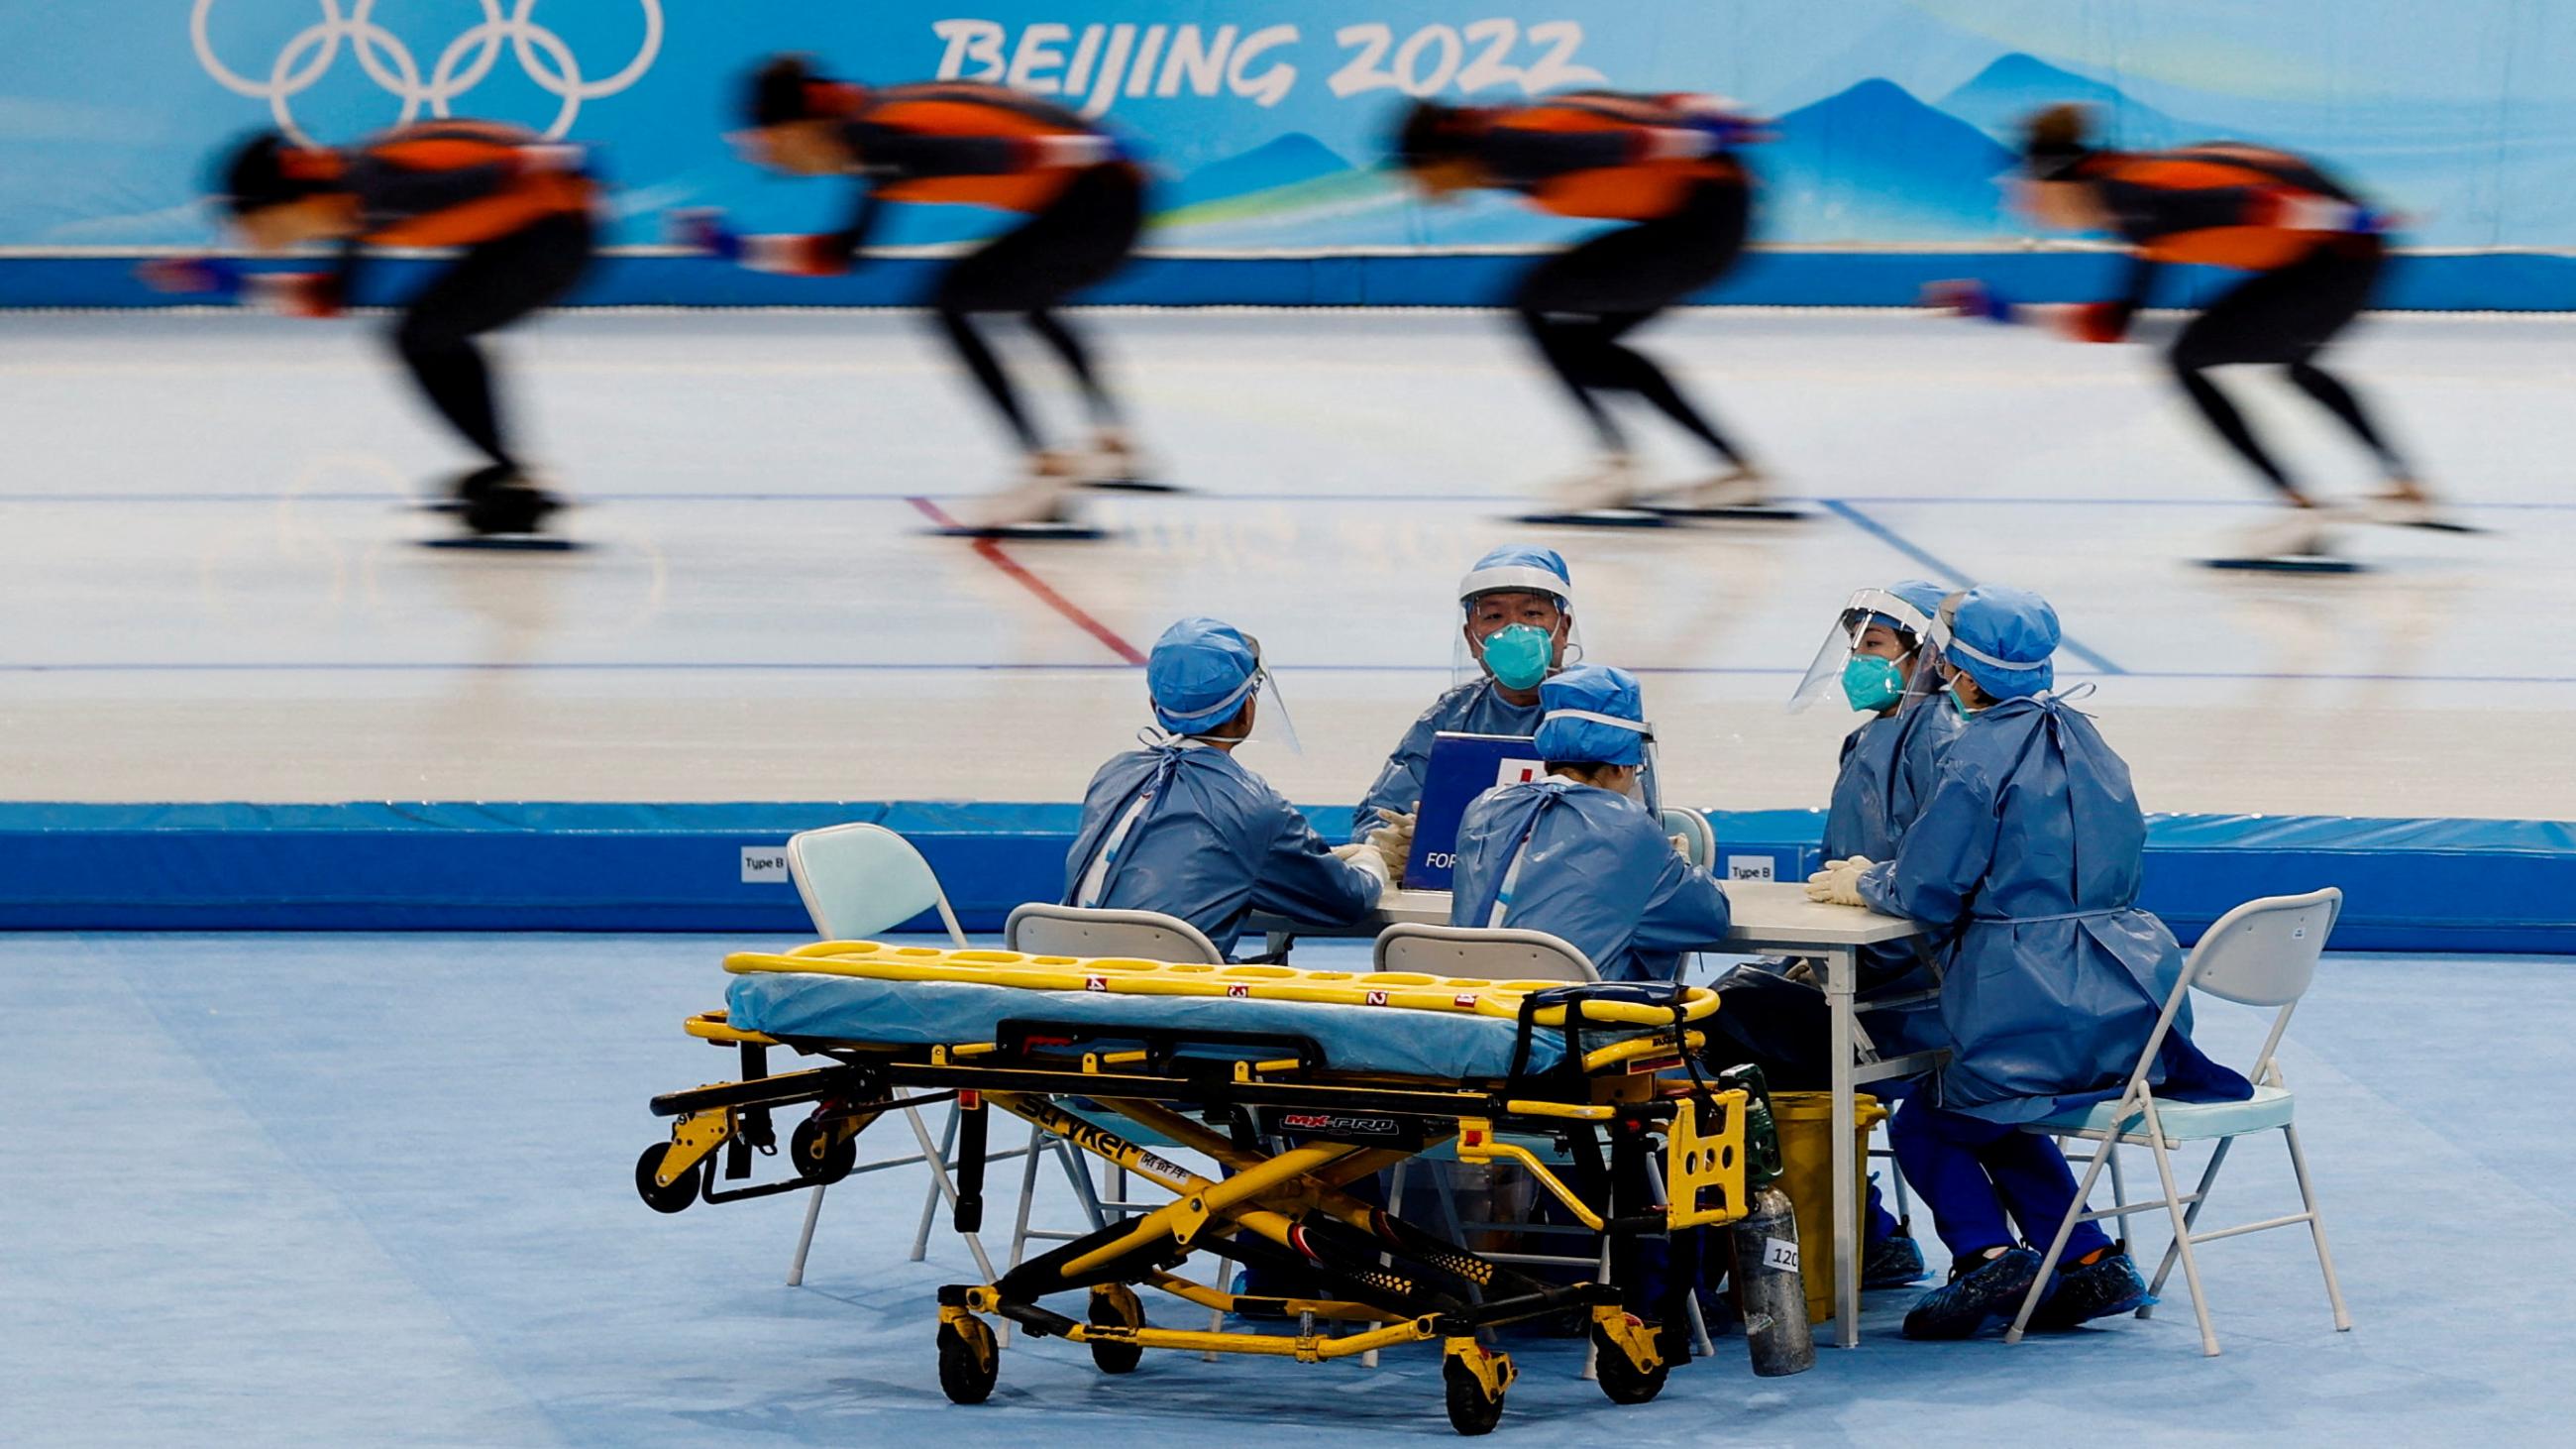 Medical staff in personal protective equipment are seen at a speed skating training session for the Beijing 2022 Winter Olympics in Beijing, China, January 28, 2022